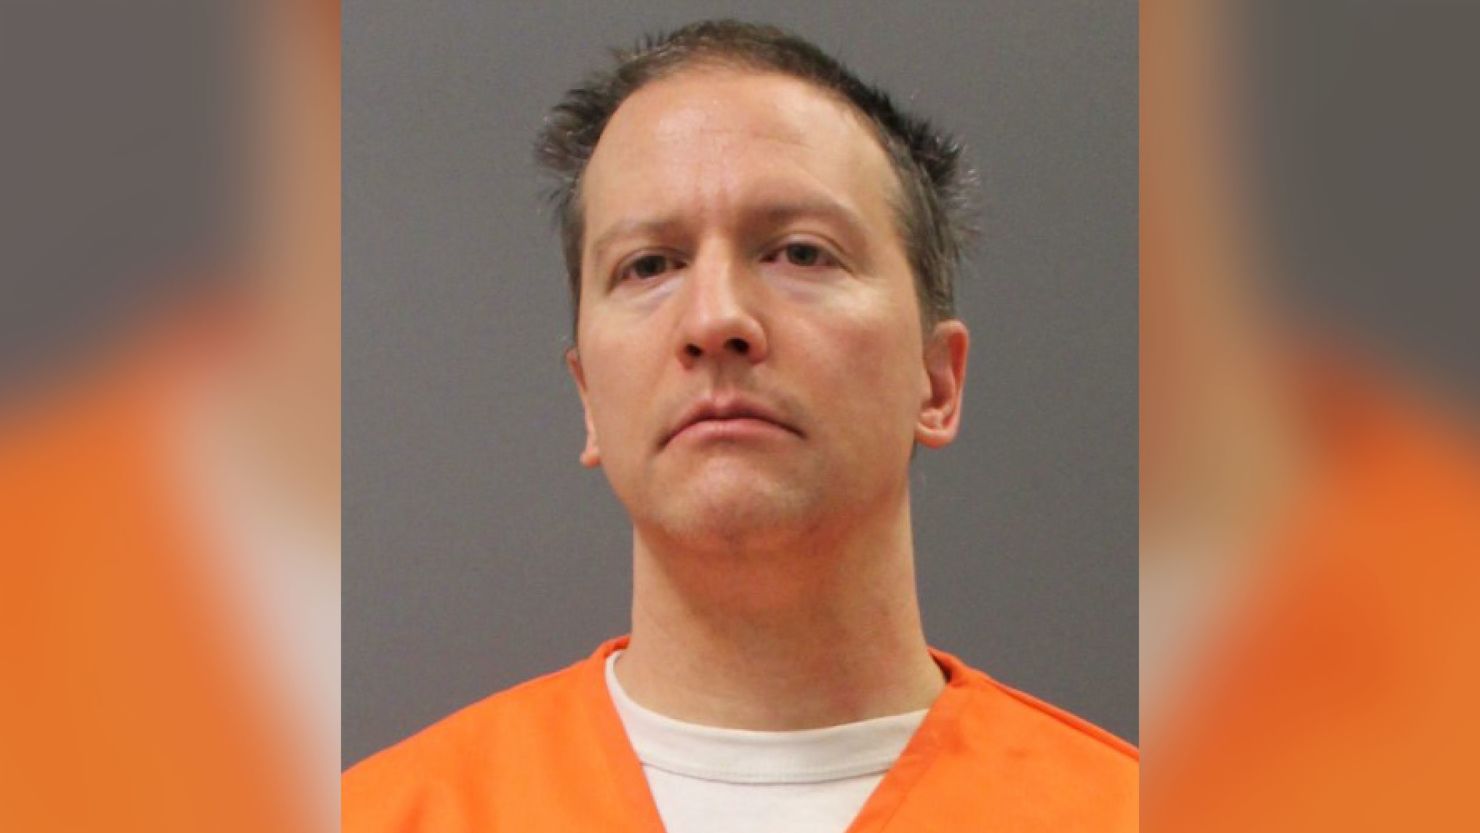 A booking photo of Derek Chauvin released by the Minnesota Department of Corrections on April 21.